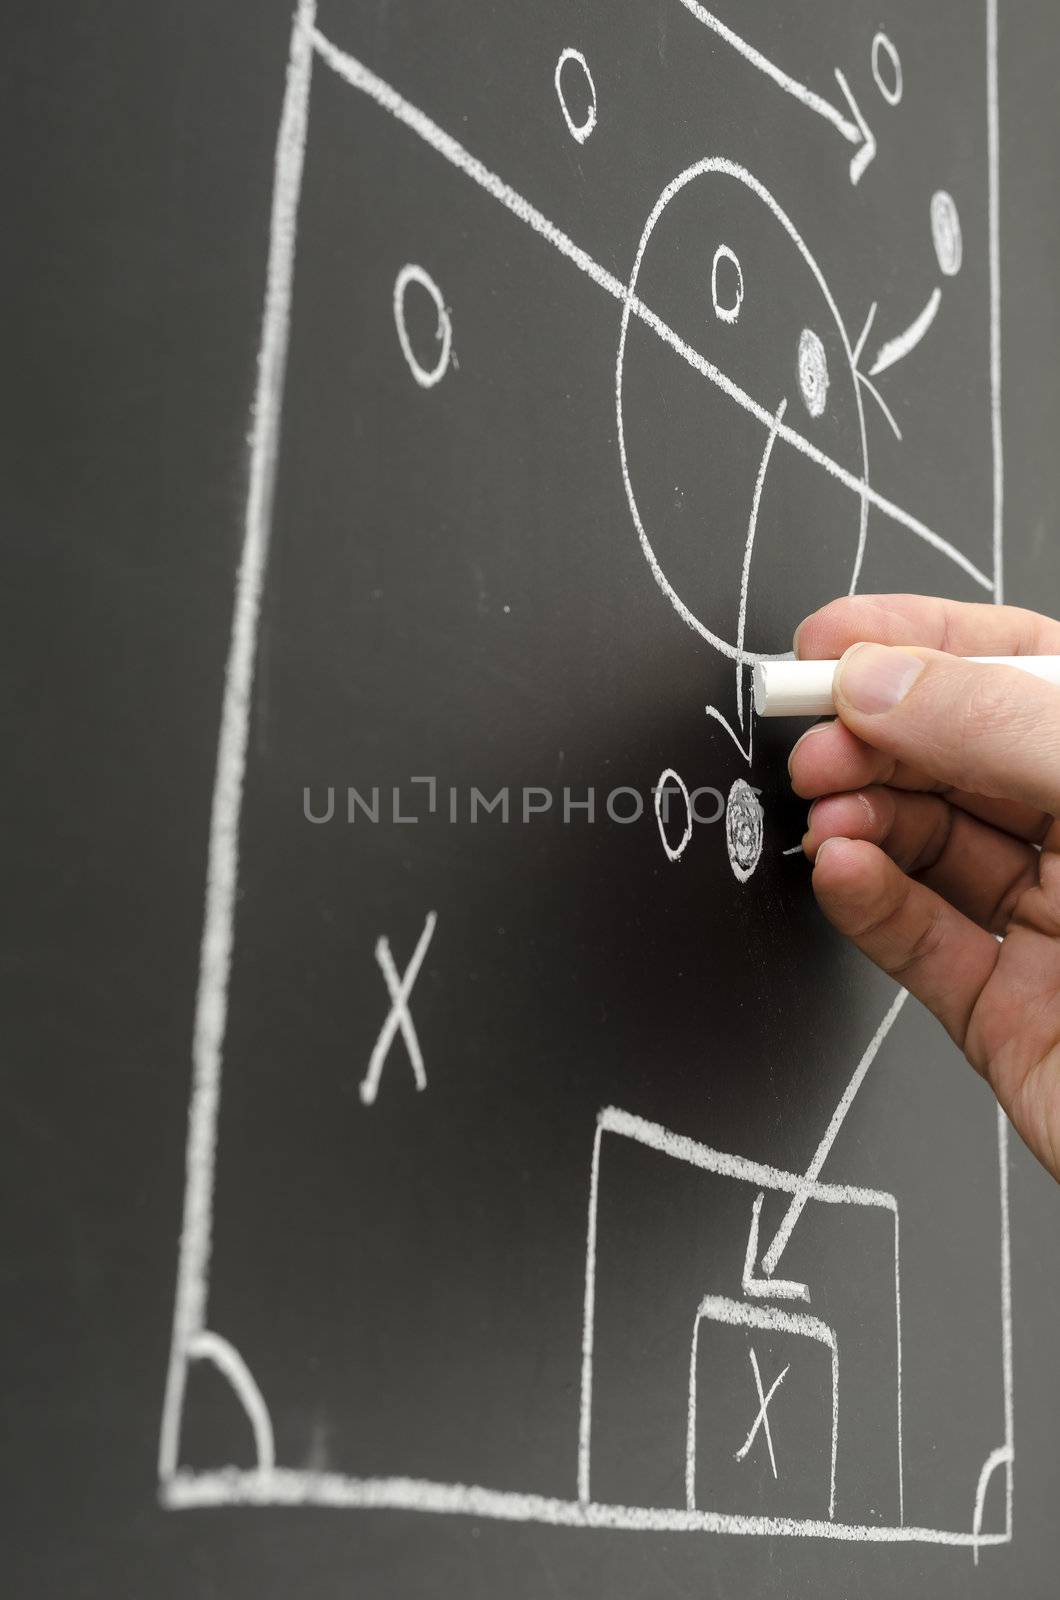 Football strategy on board with a male hand drawing a pass between players.